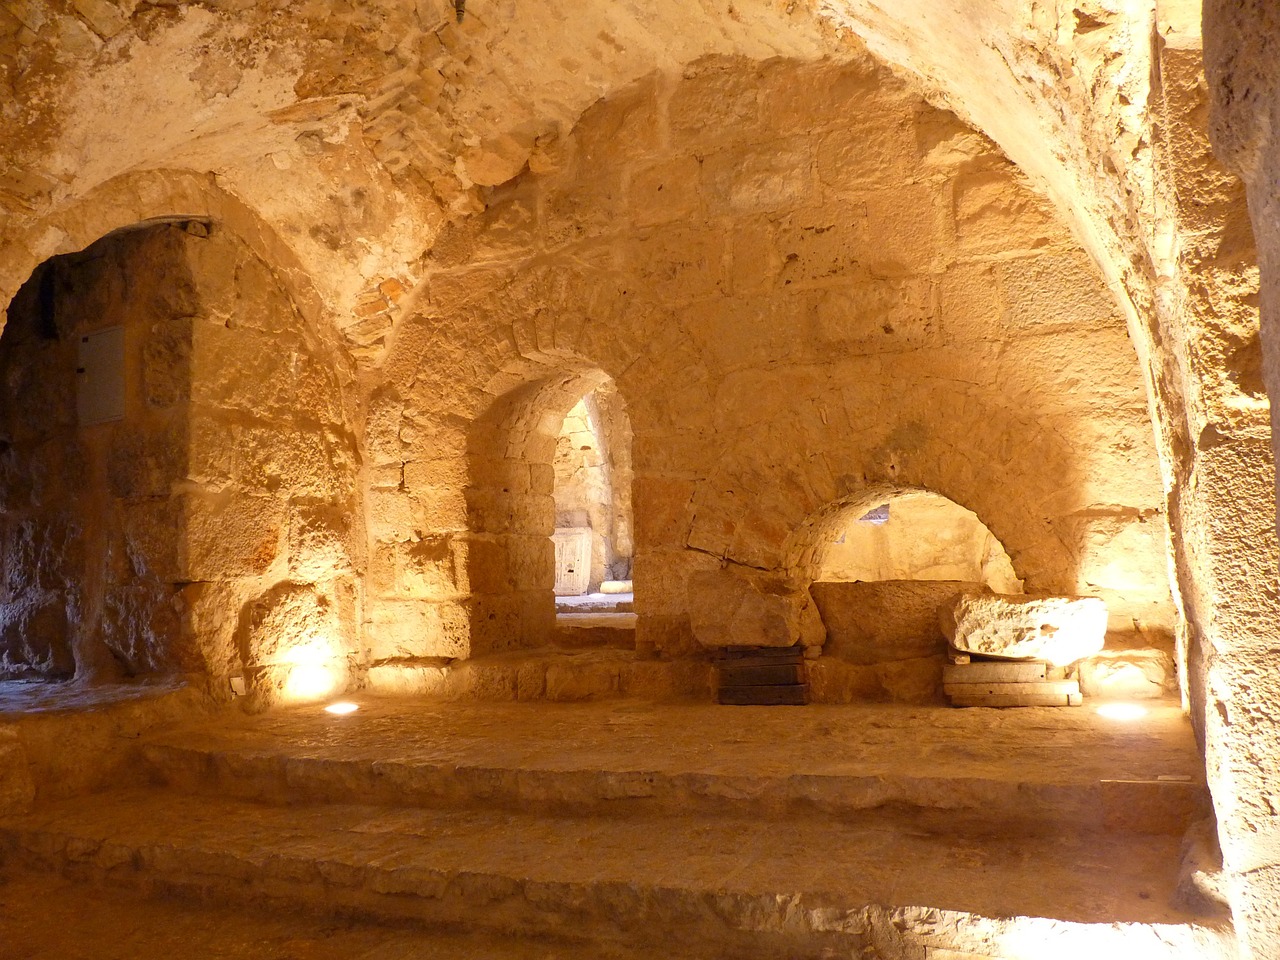 a well lit room in an old stone building, by Saul Yaffie, flickr, inside the tomb of jesus, portcullis, citadel, museum photo